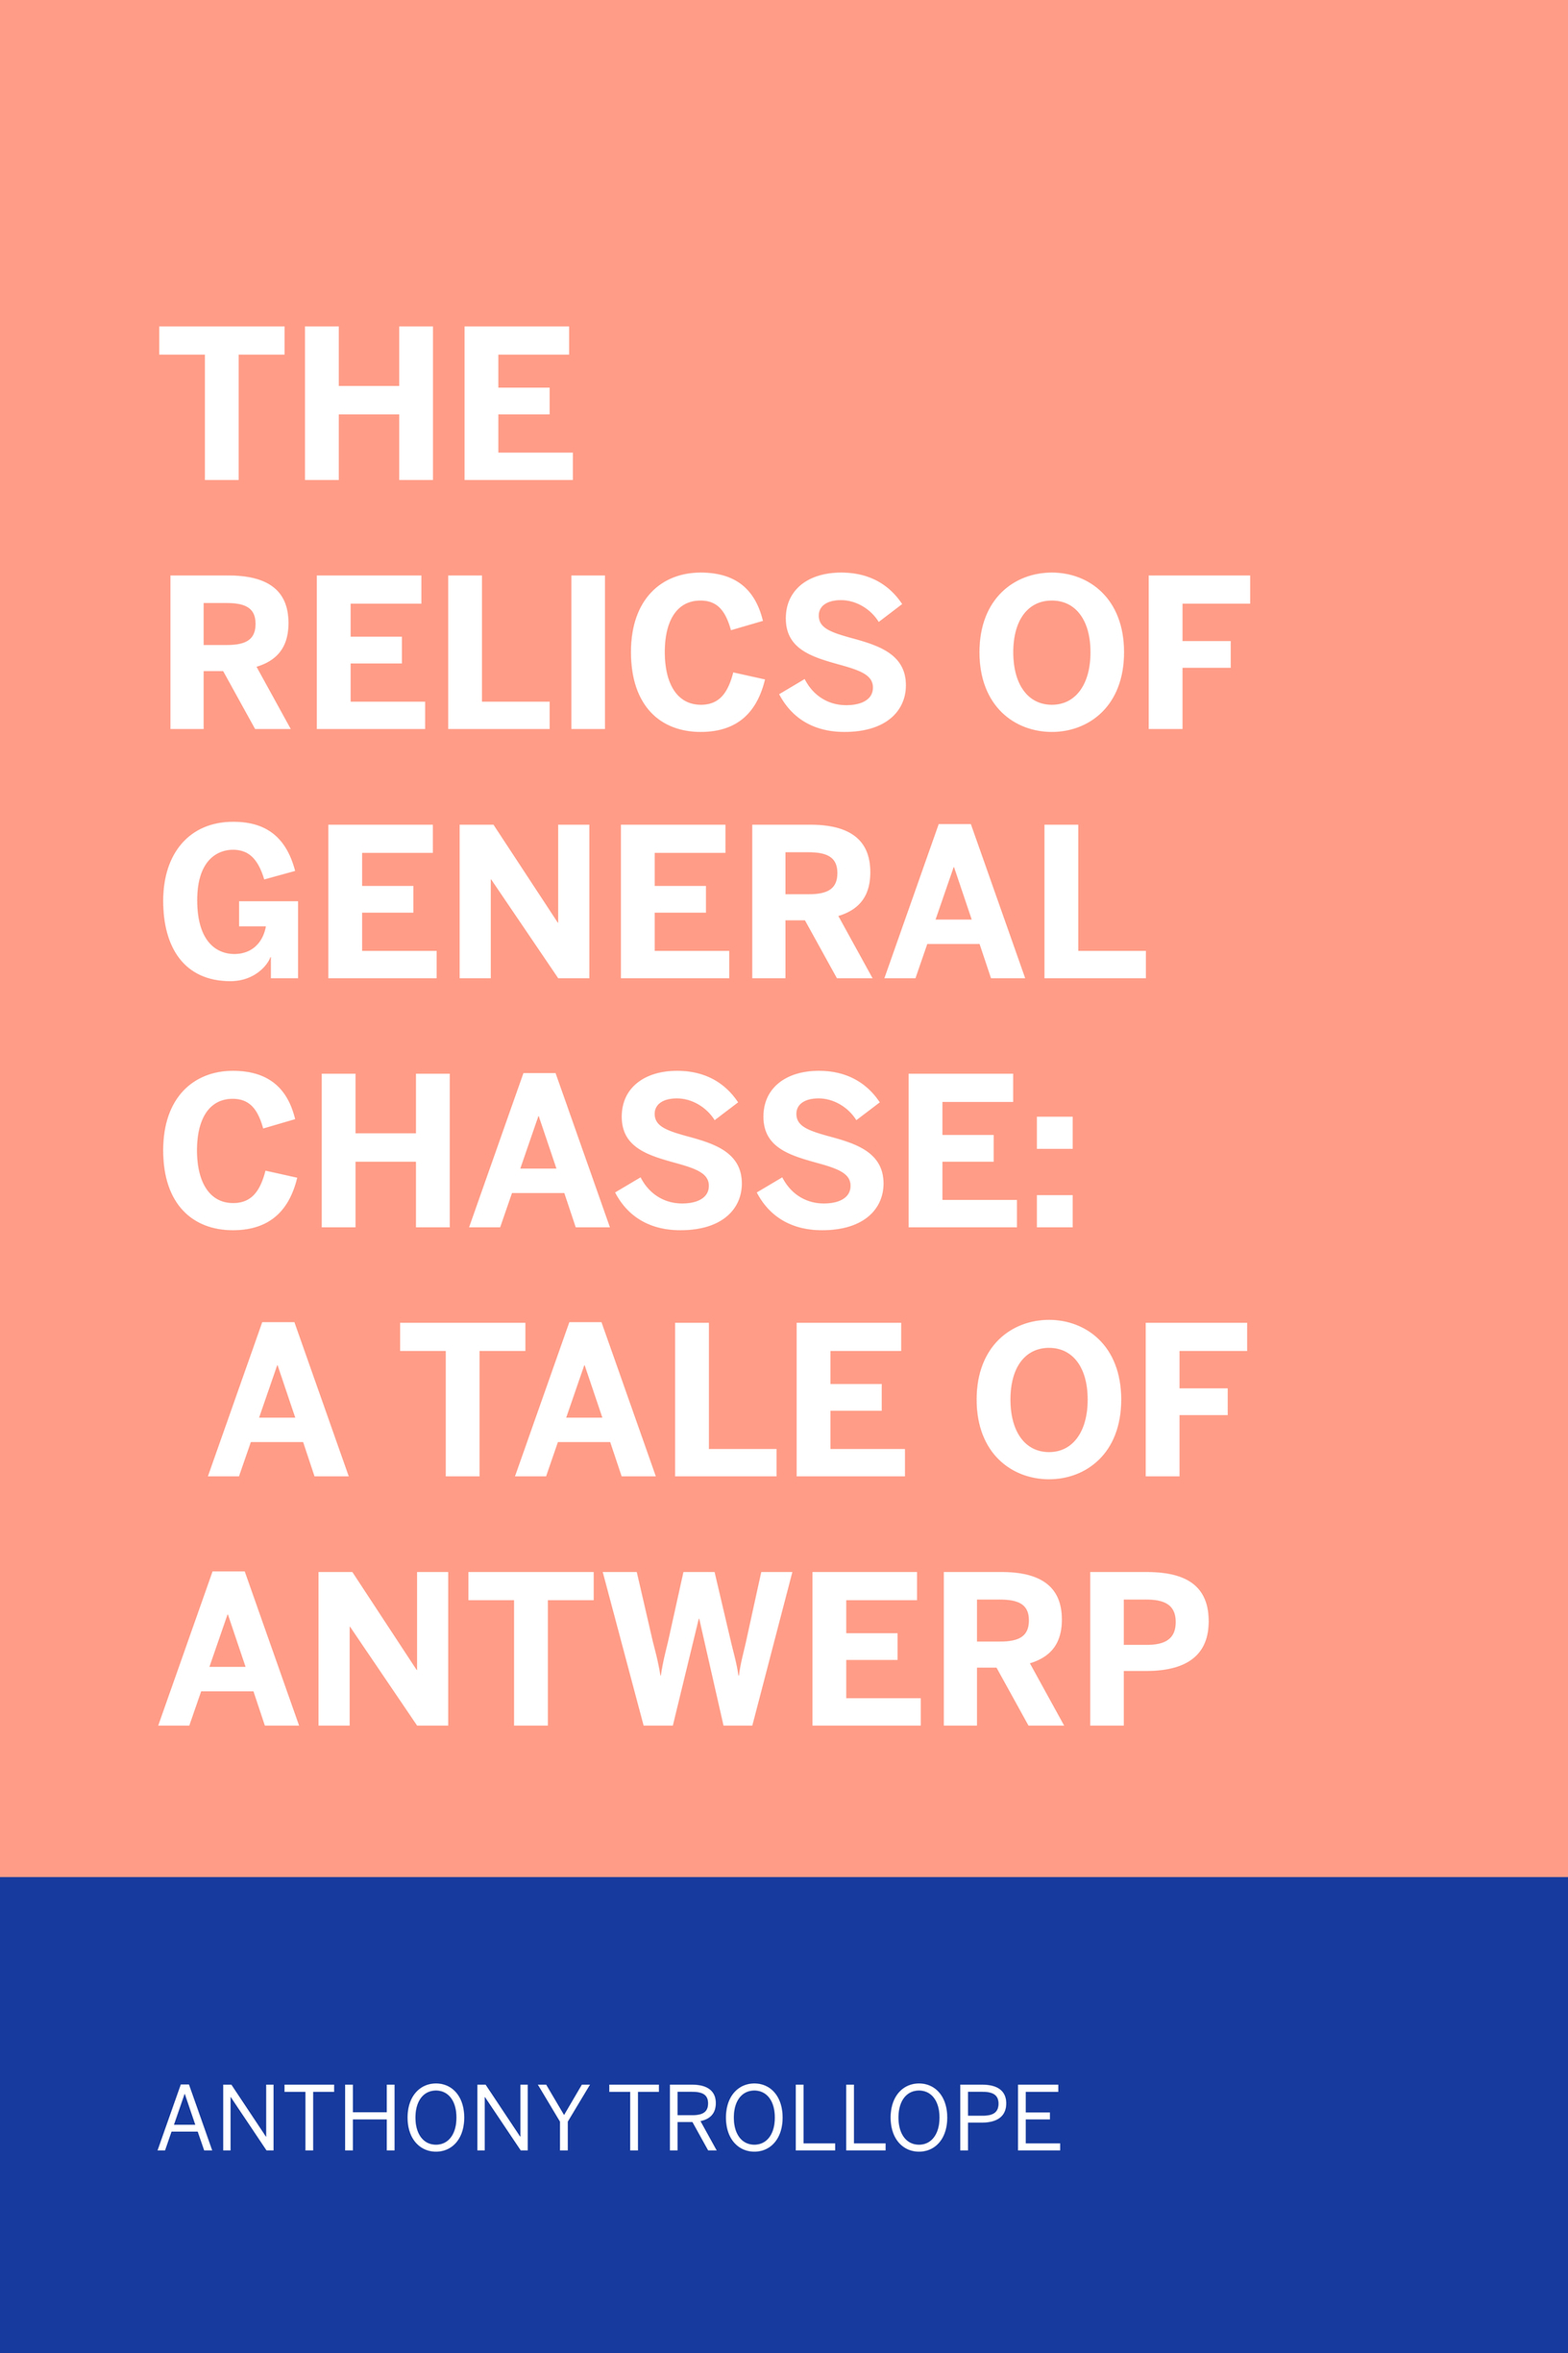 the relics of general chasse: a tale of antwerp